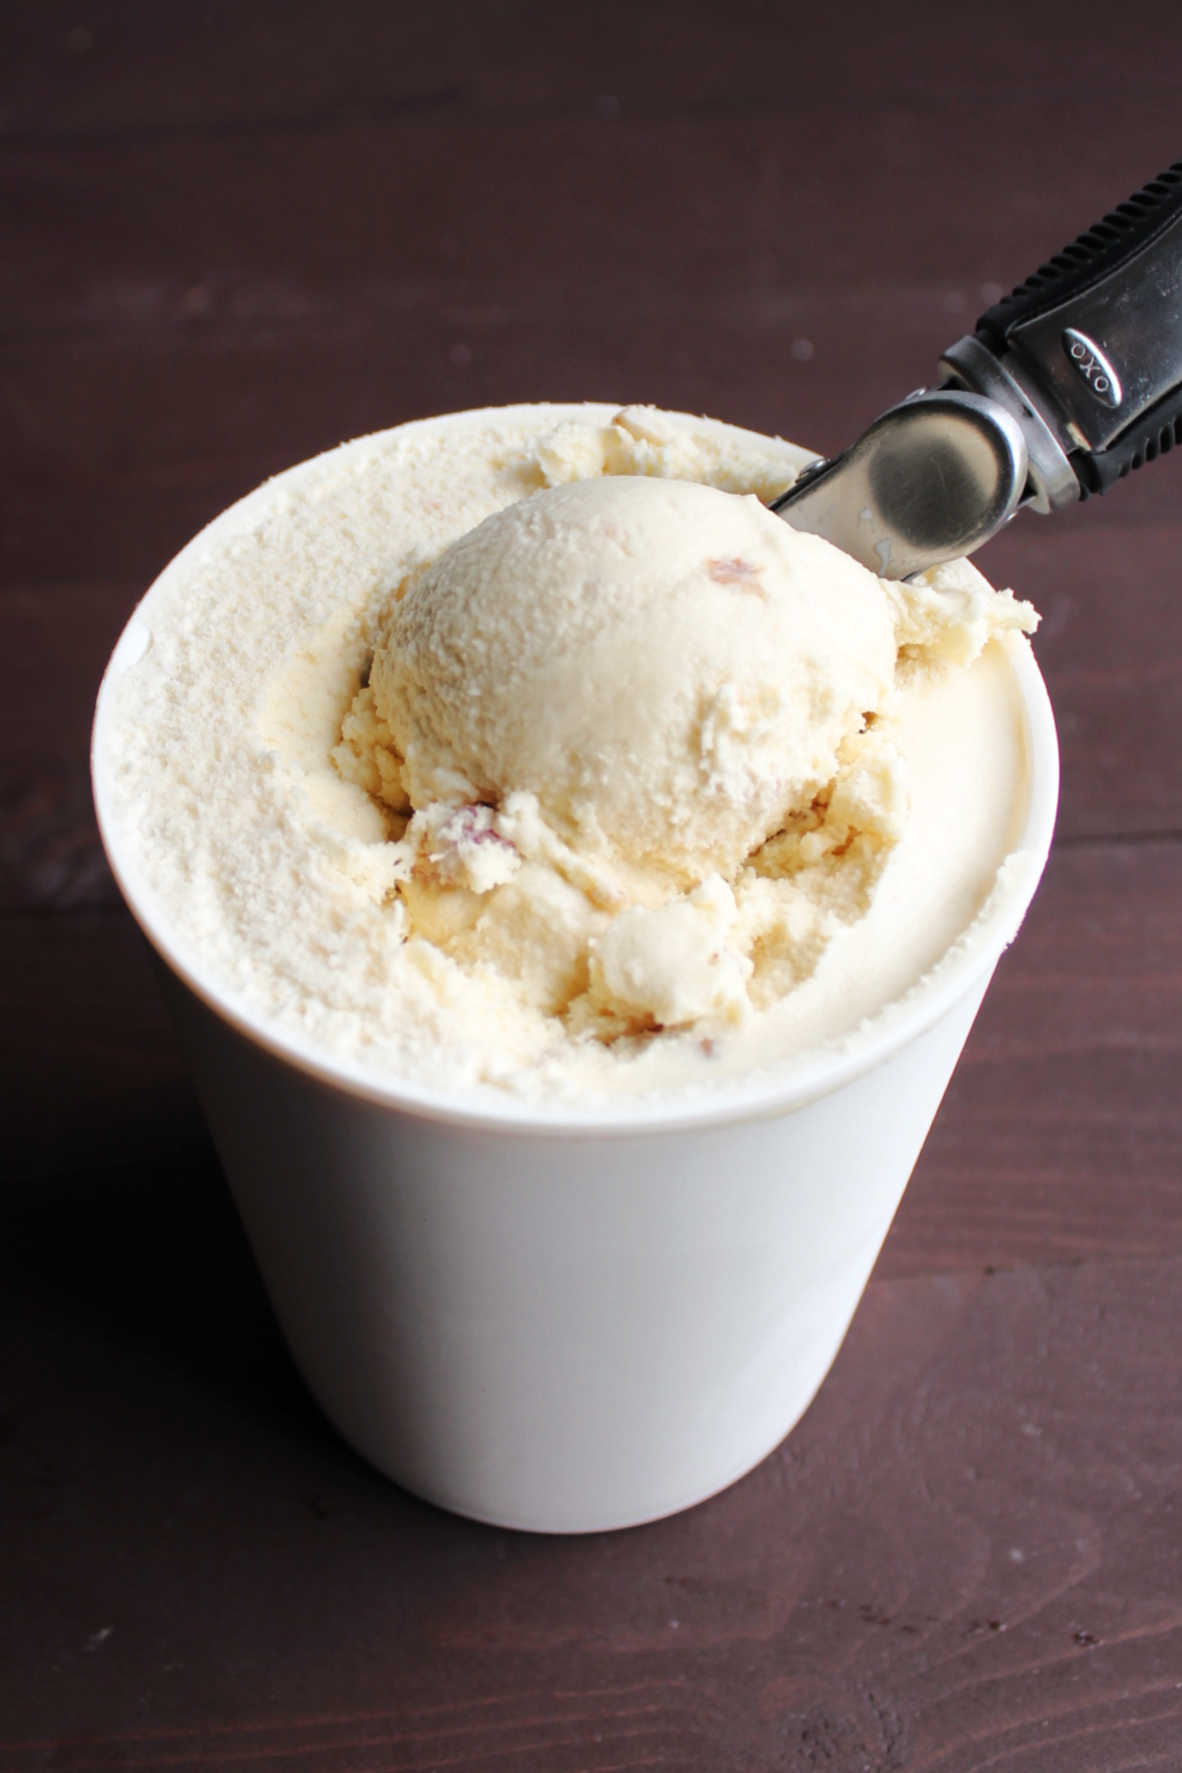 scooping out first helping of maple bacon ice cream from storage container.